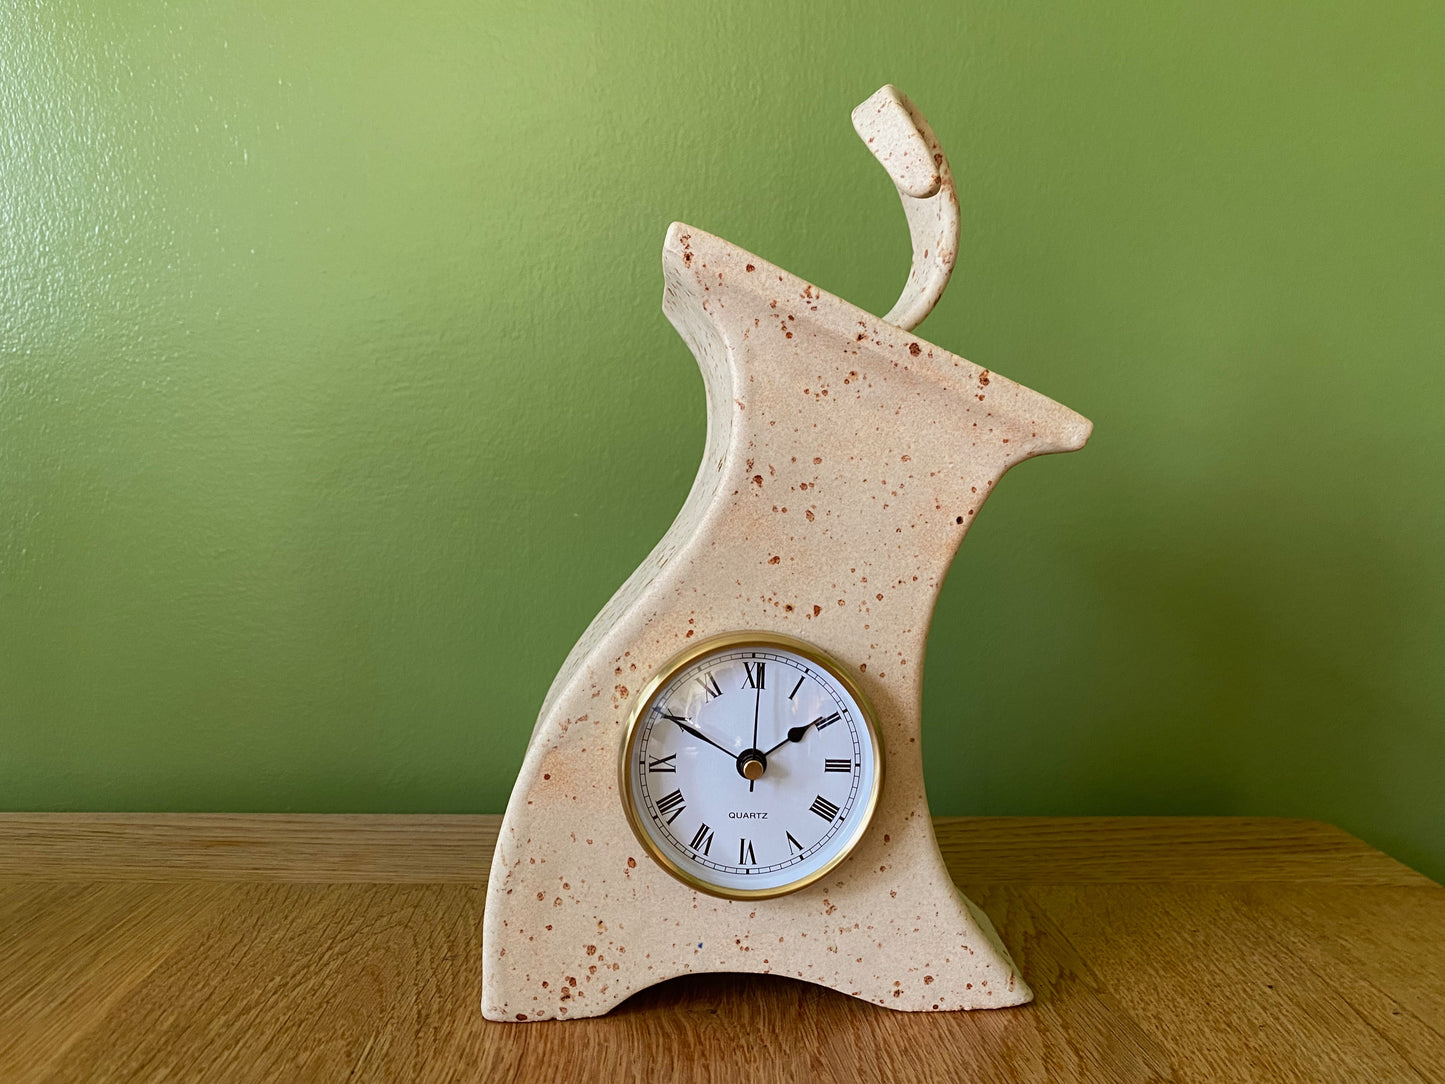 Ceramic Mantel Clock with Enclosed Face - Oatmeal Speckle